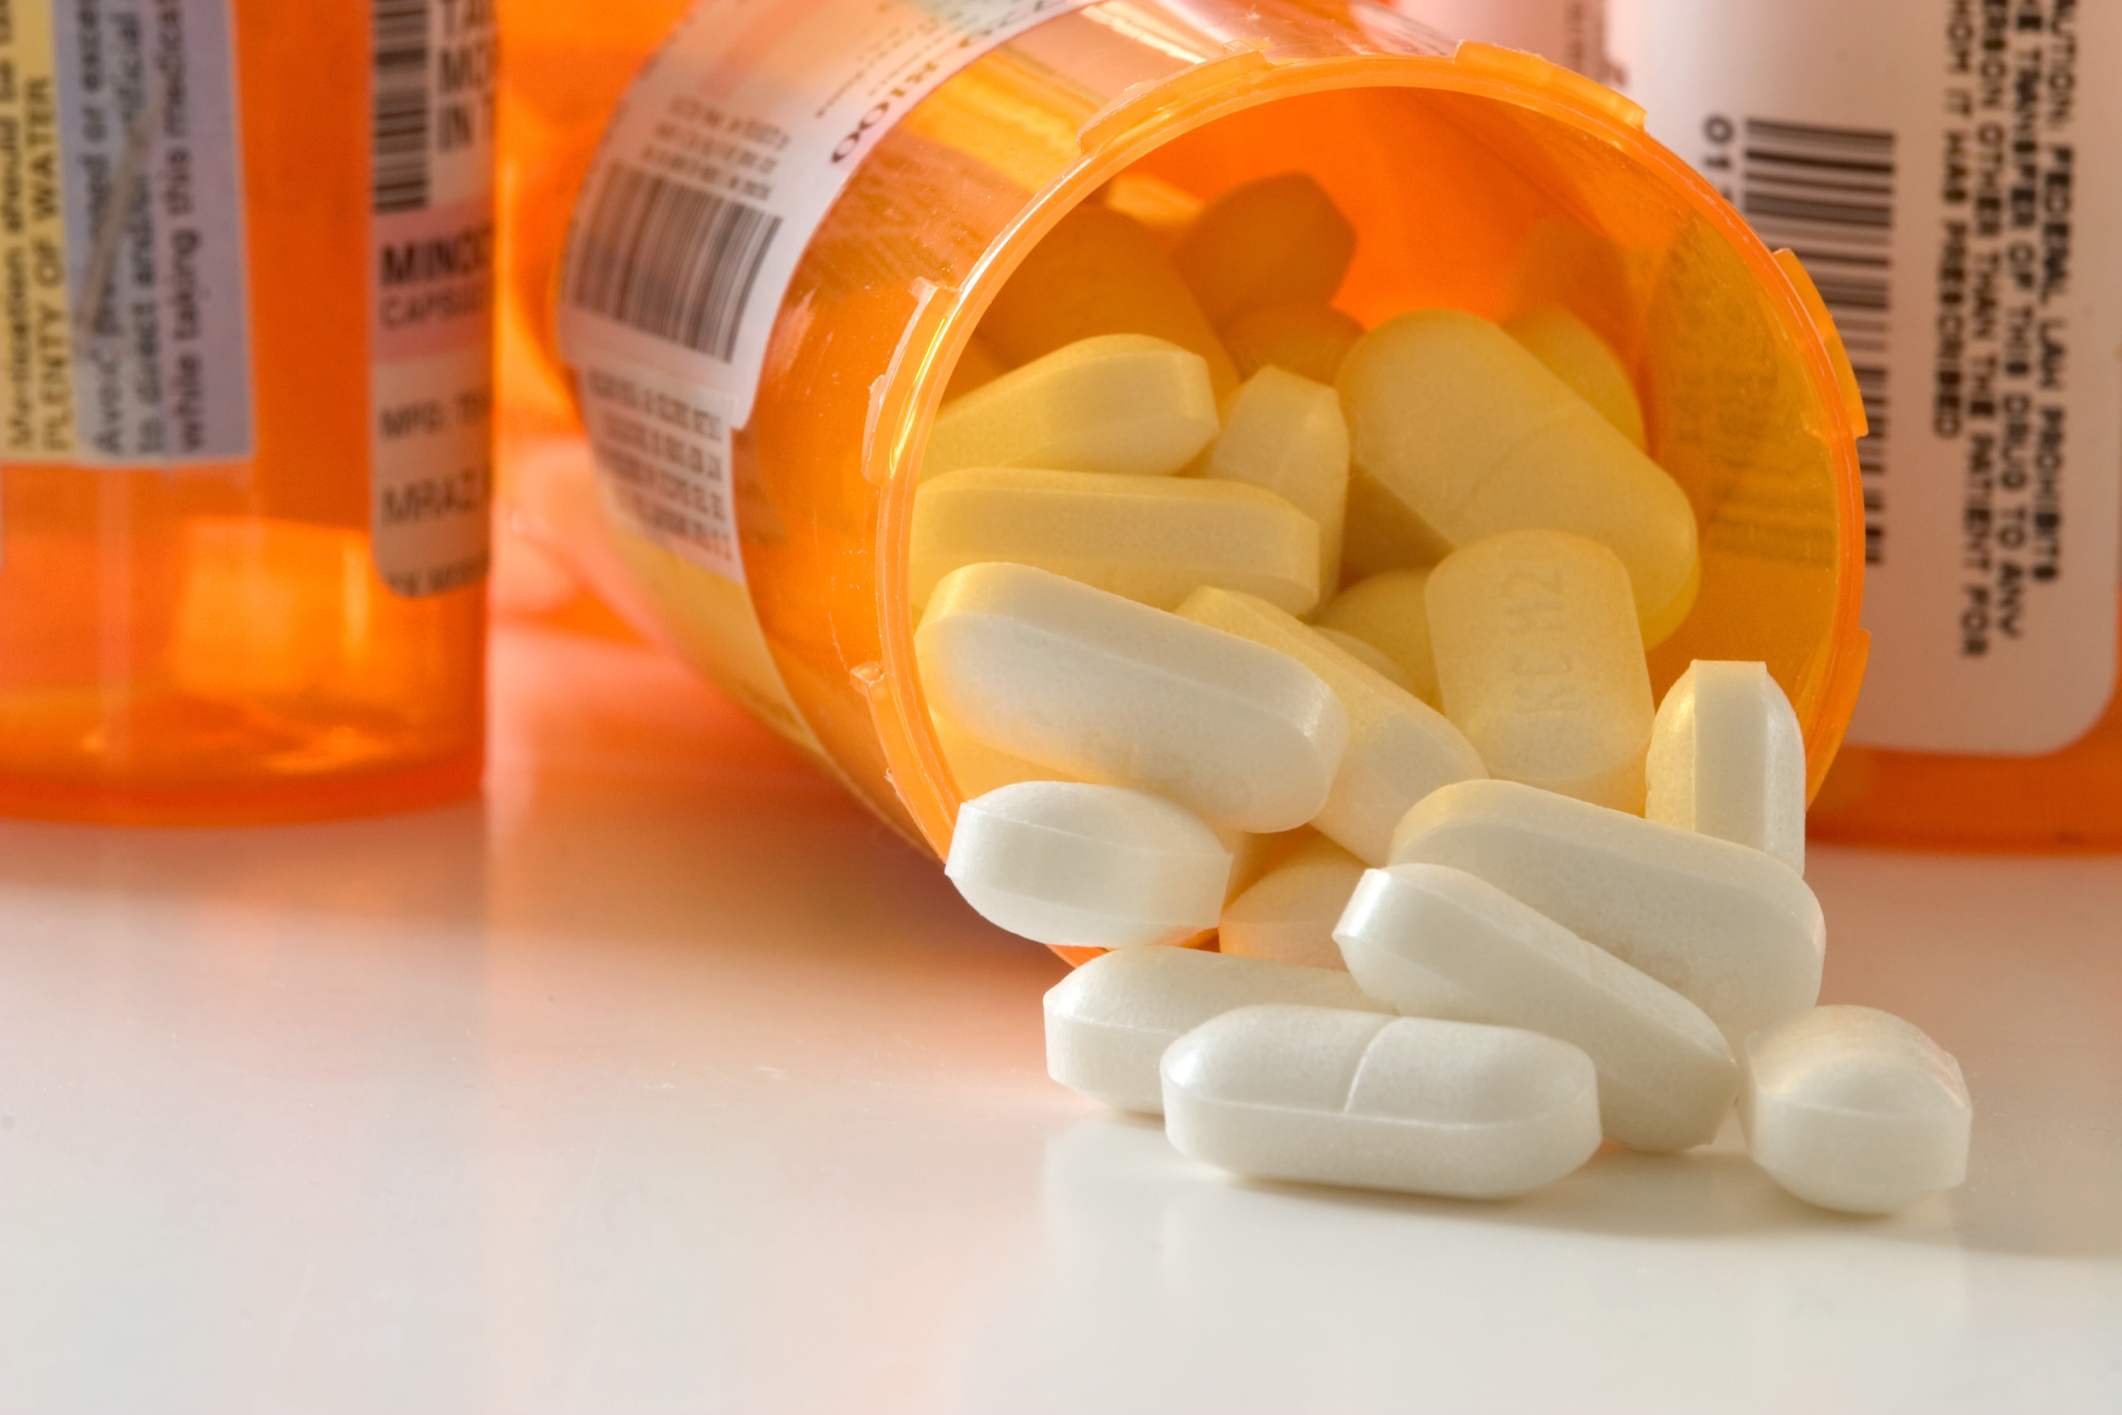 Spring cleaning includes getting rid of old, unused prescription drugs